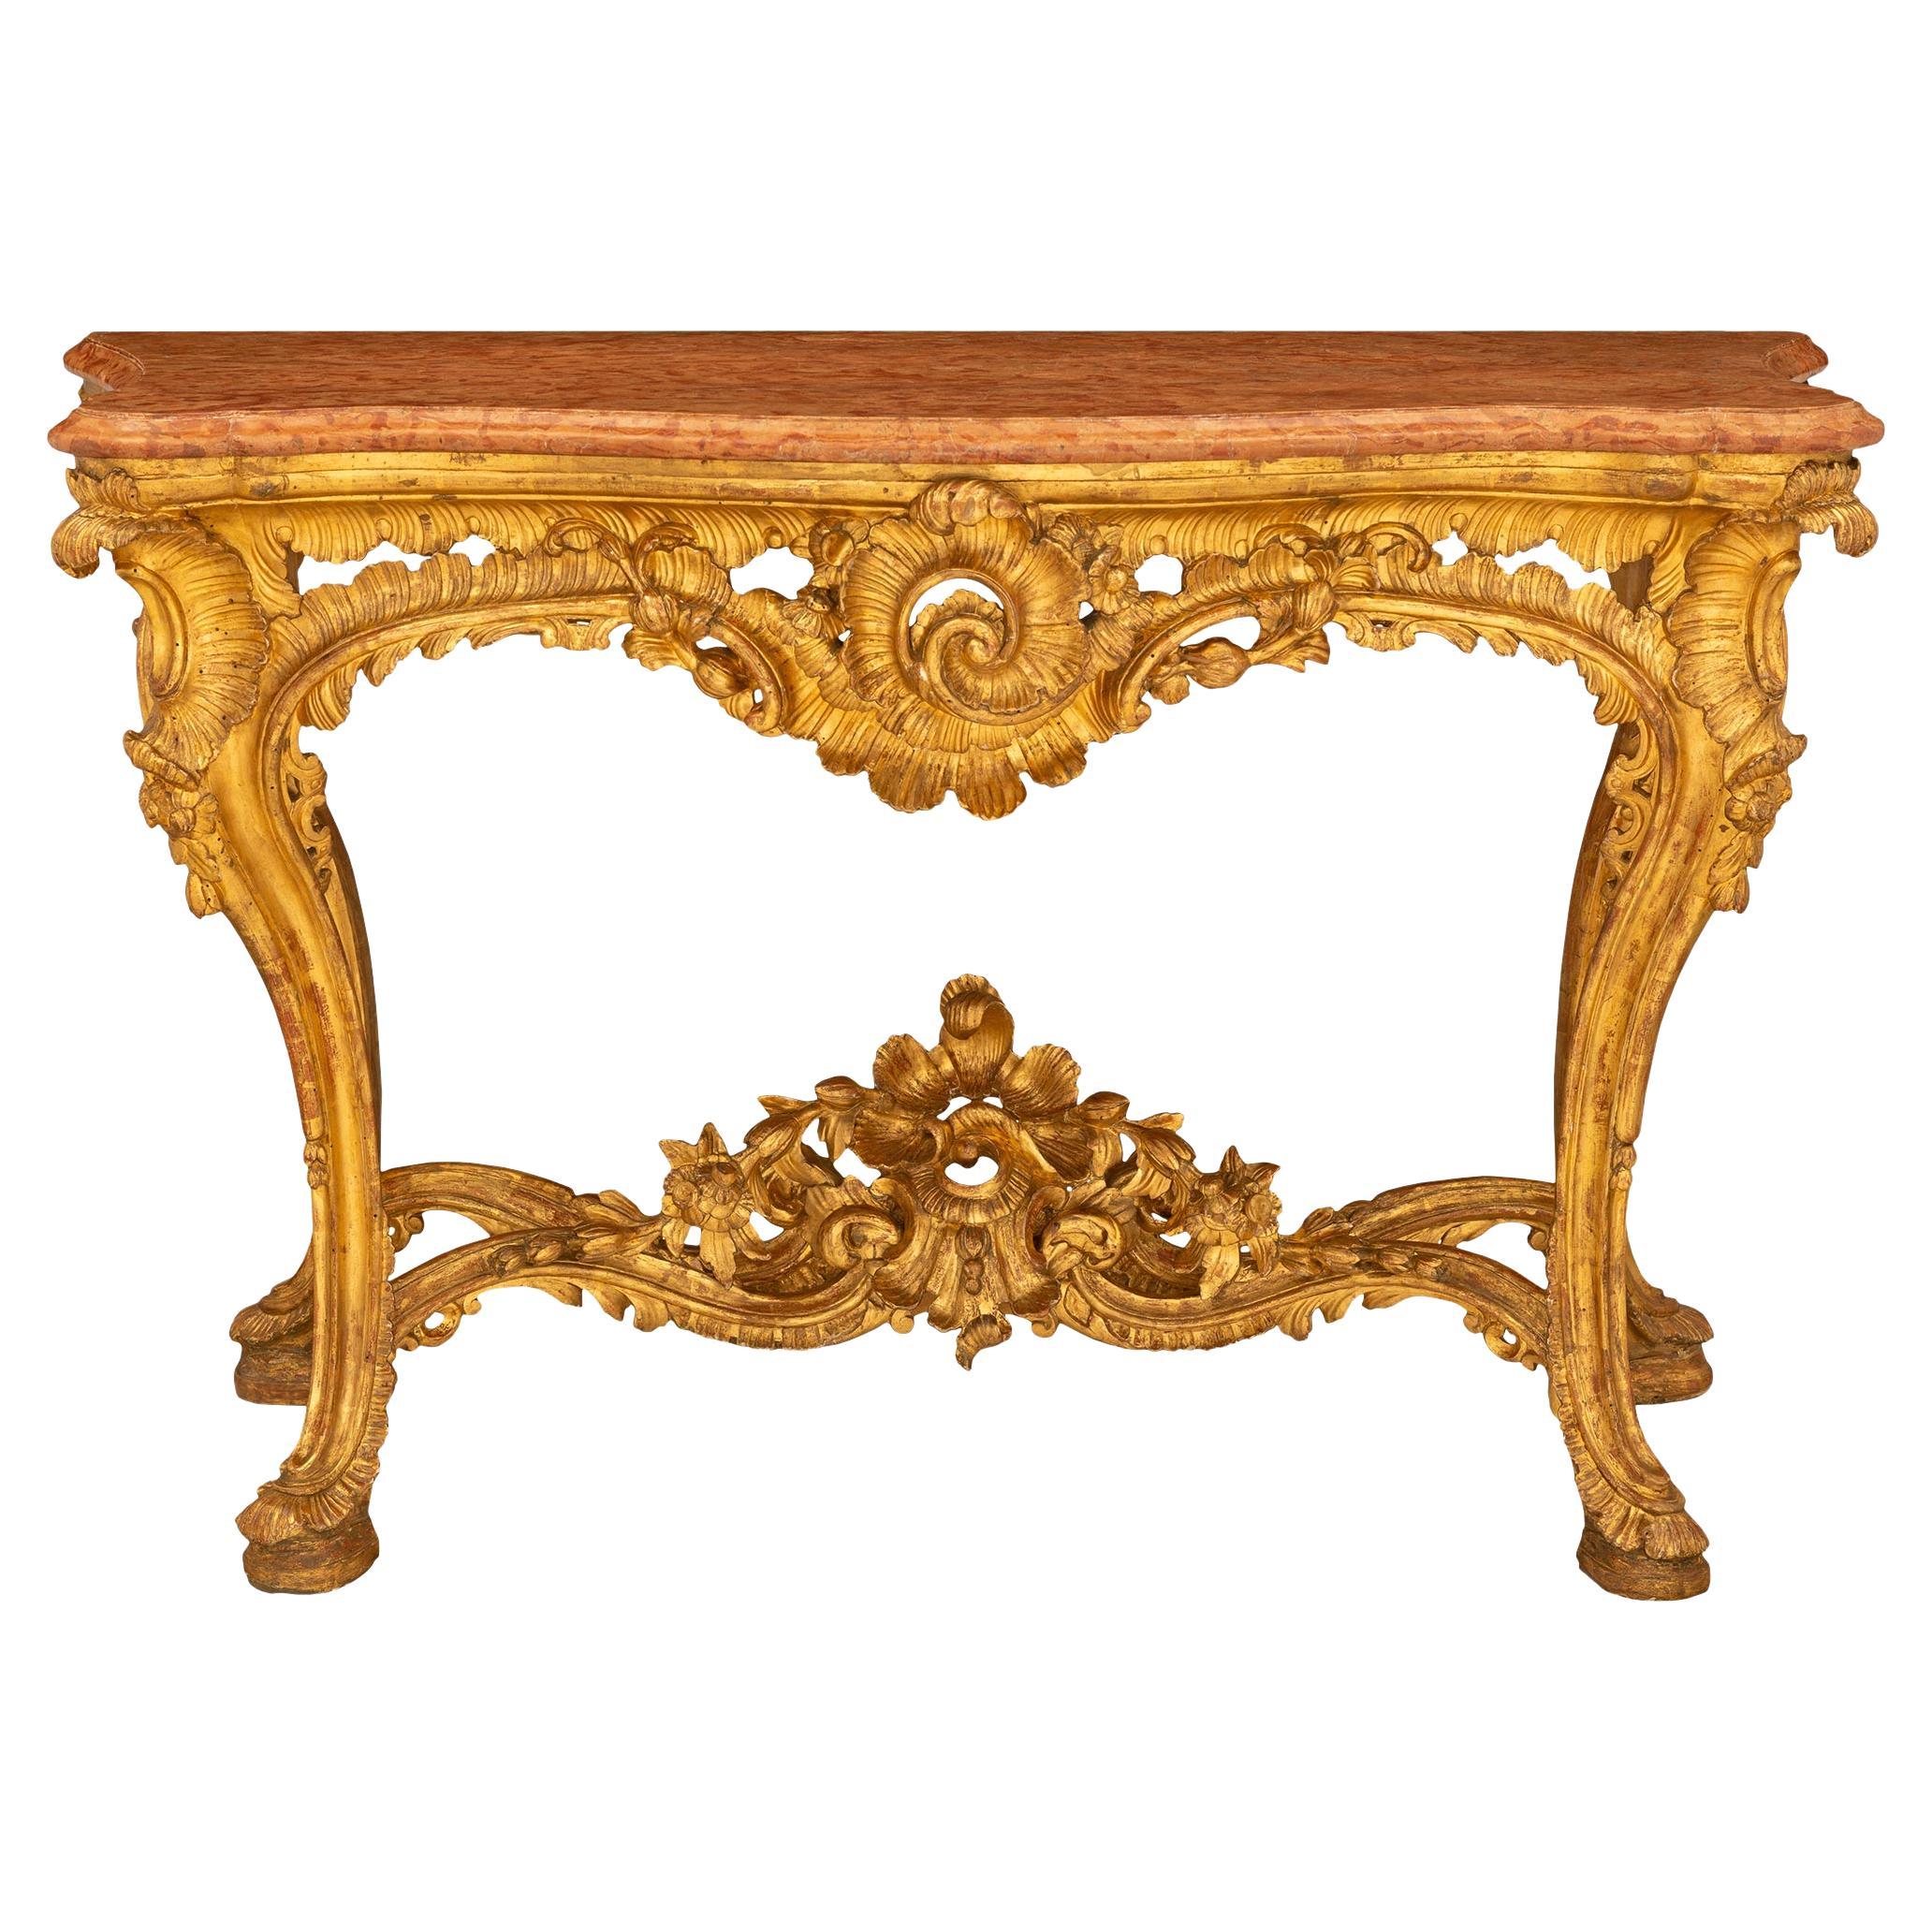 Early 18th Century Italian Napolitan Freestanding Giltwood Console For Sale